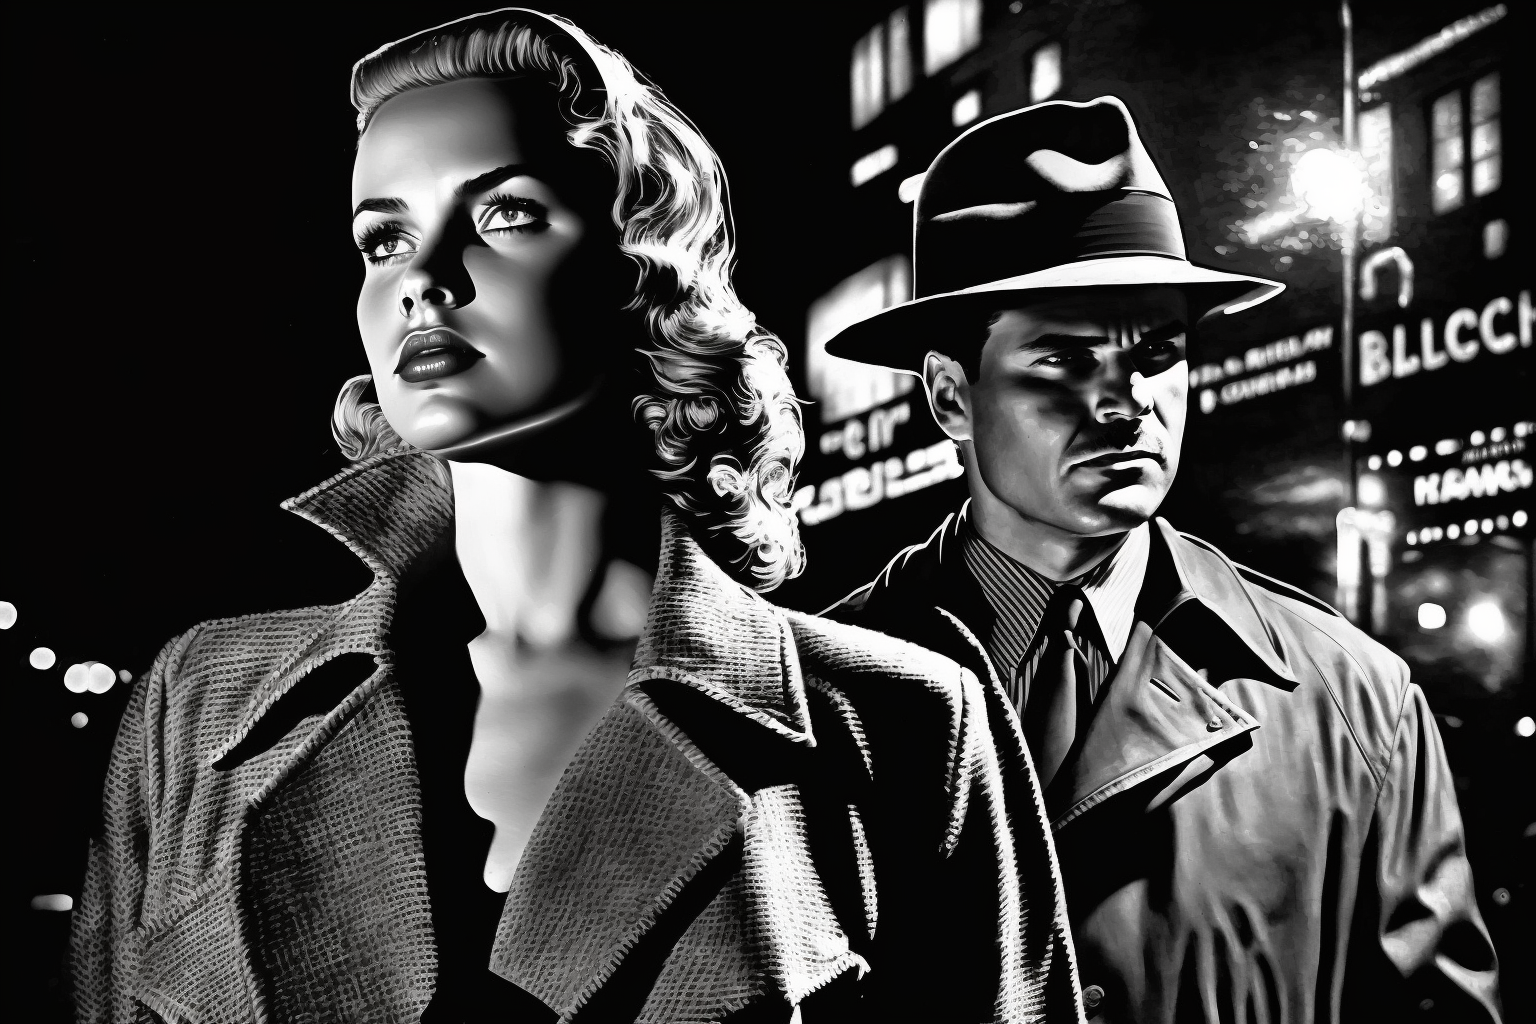 1930s noir femme fatale and detective, on a street at night, image created with Midjourney